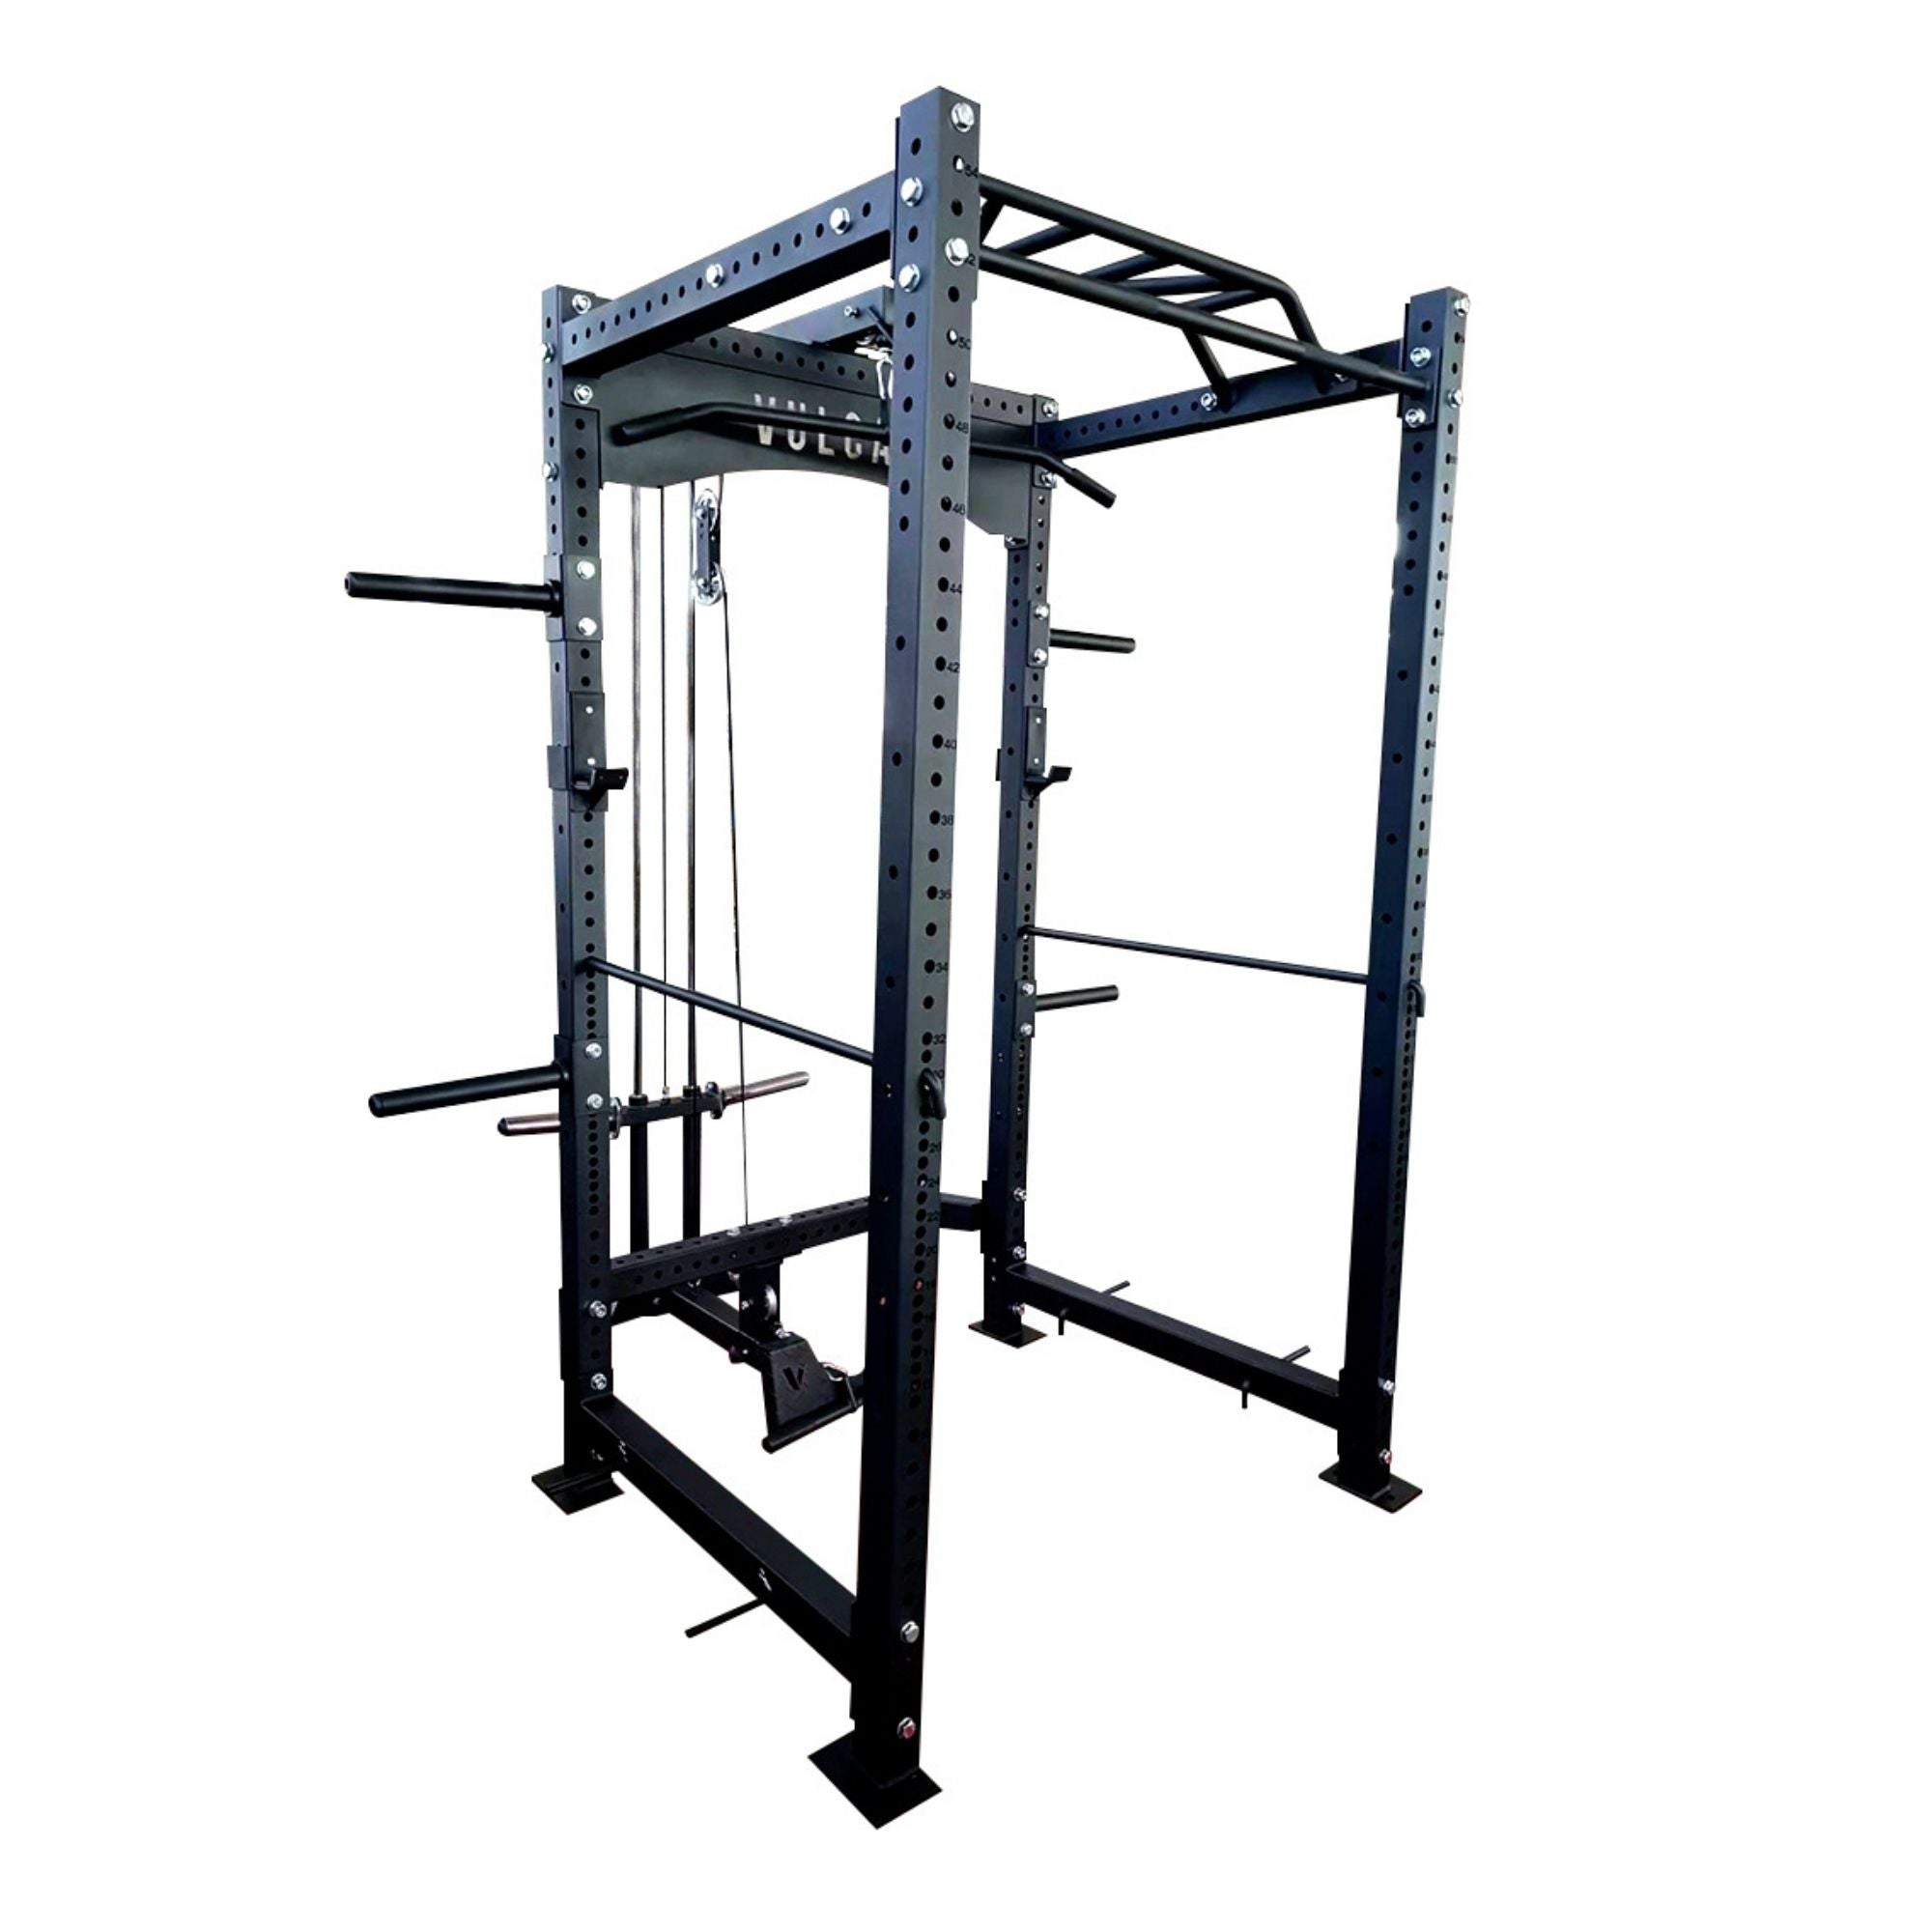 VULCAN Lat-Pulldown / Low Row Attachment for COMMERCIAL Power Cage | IN STOCK